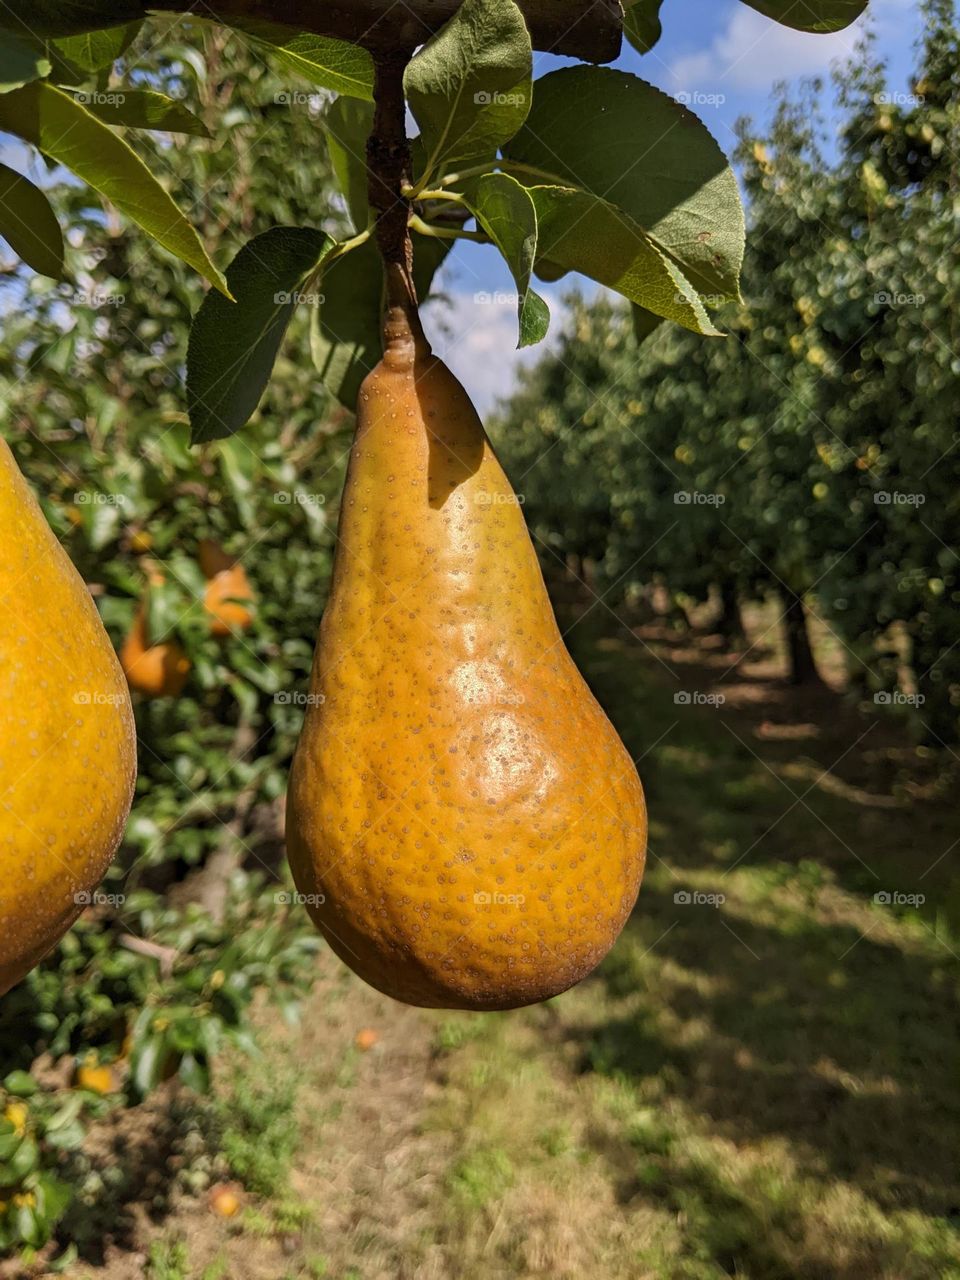 pear in an orchard ready to harvest